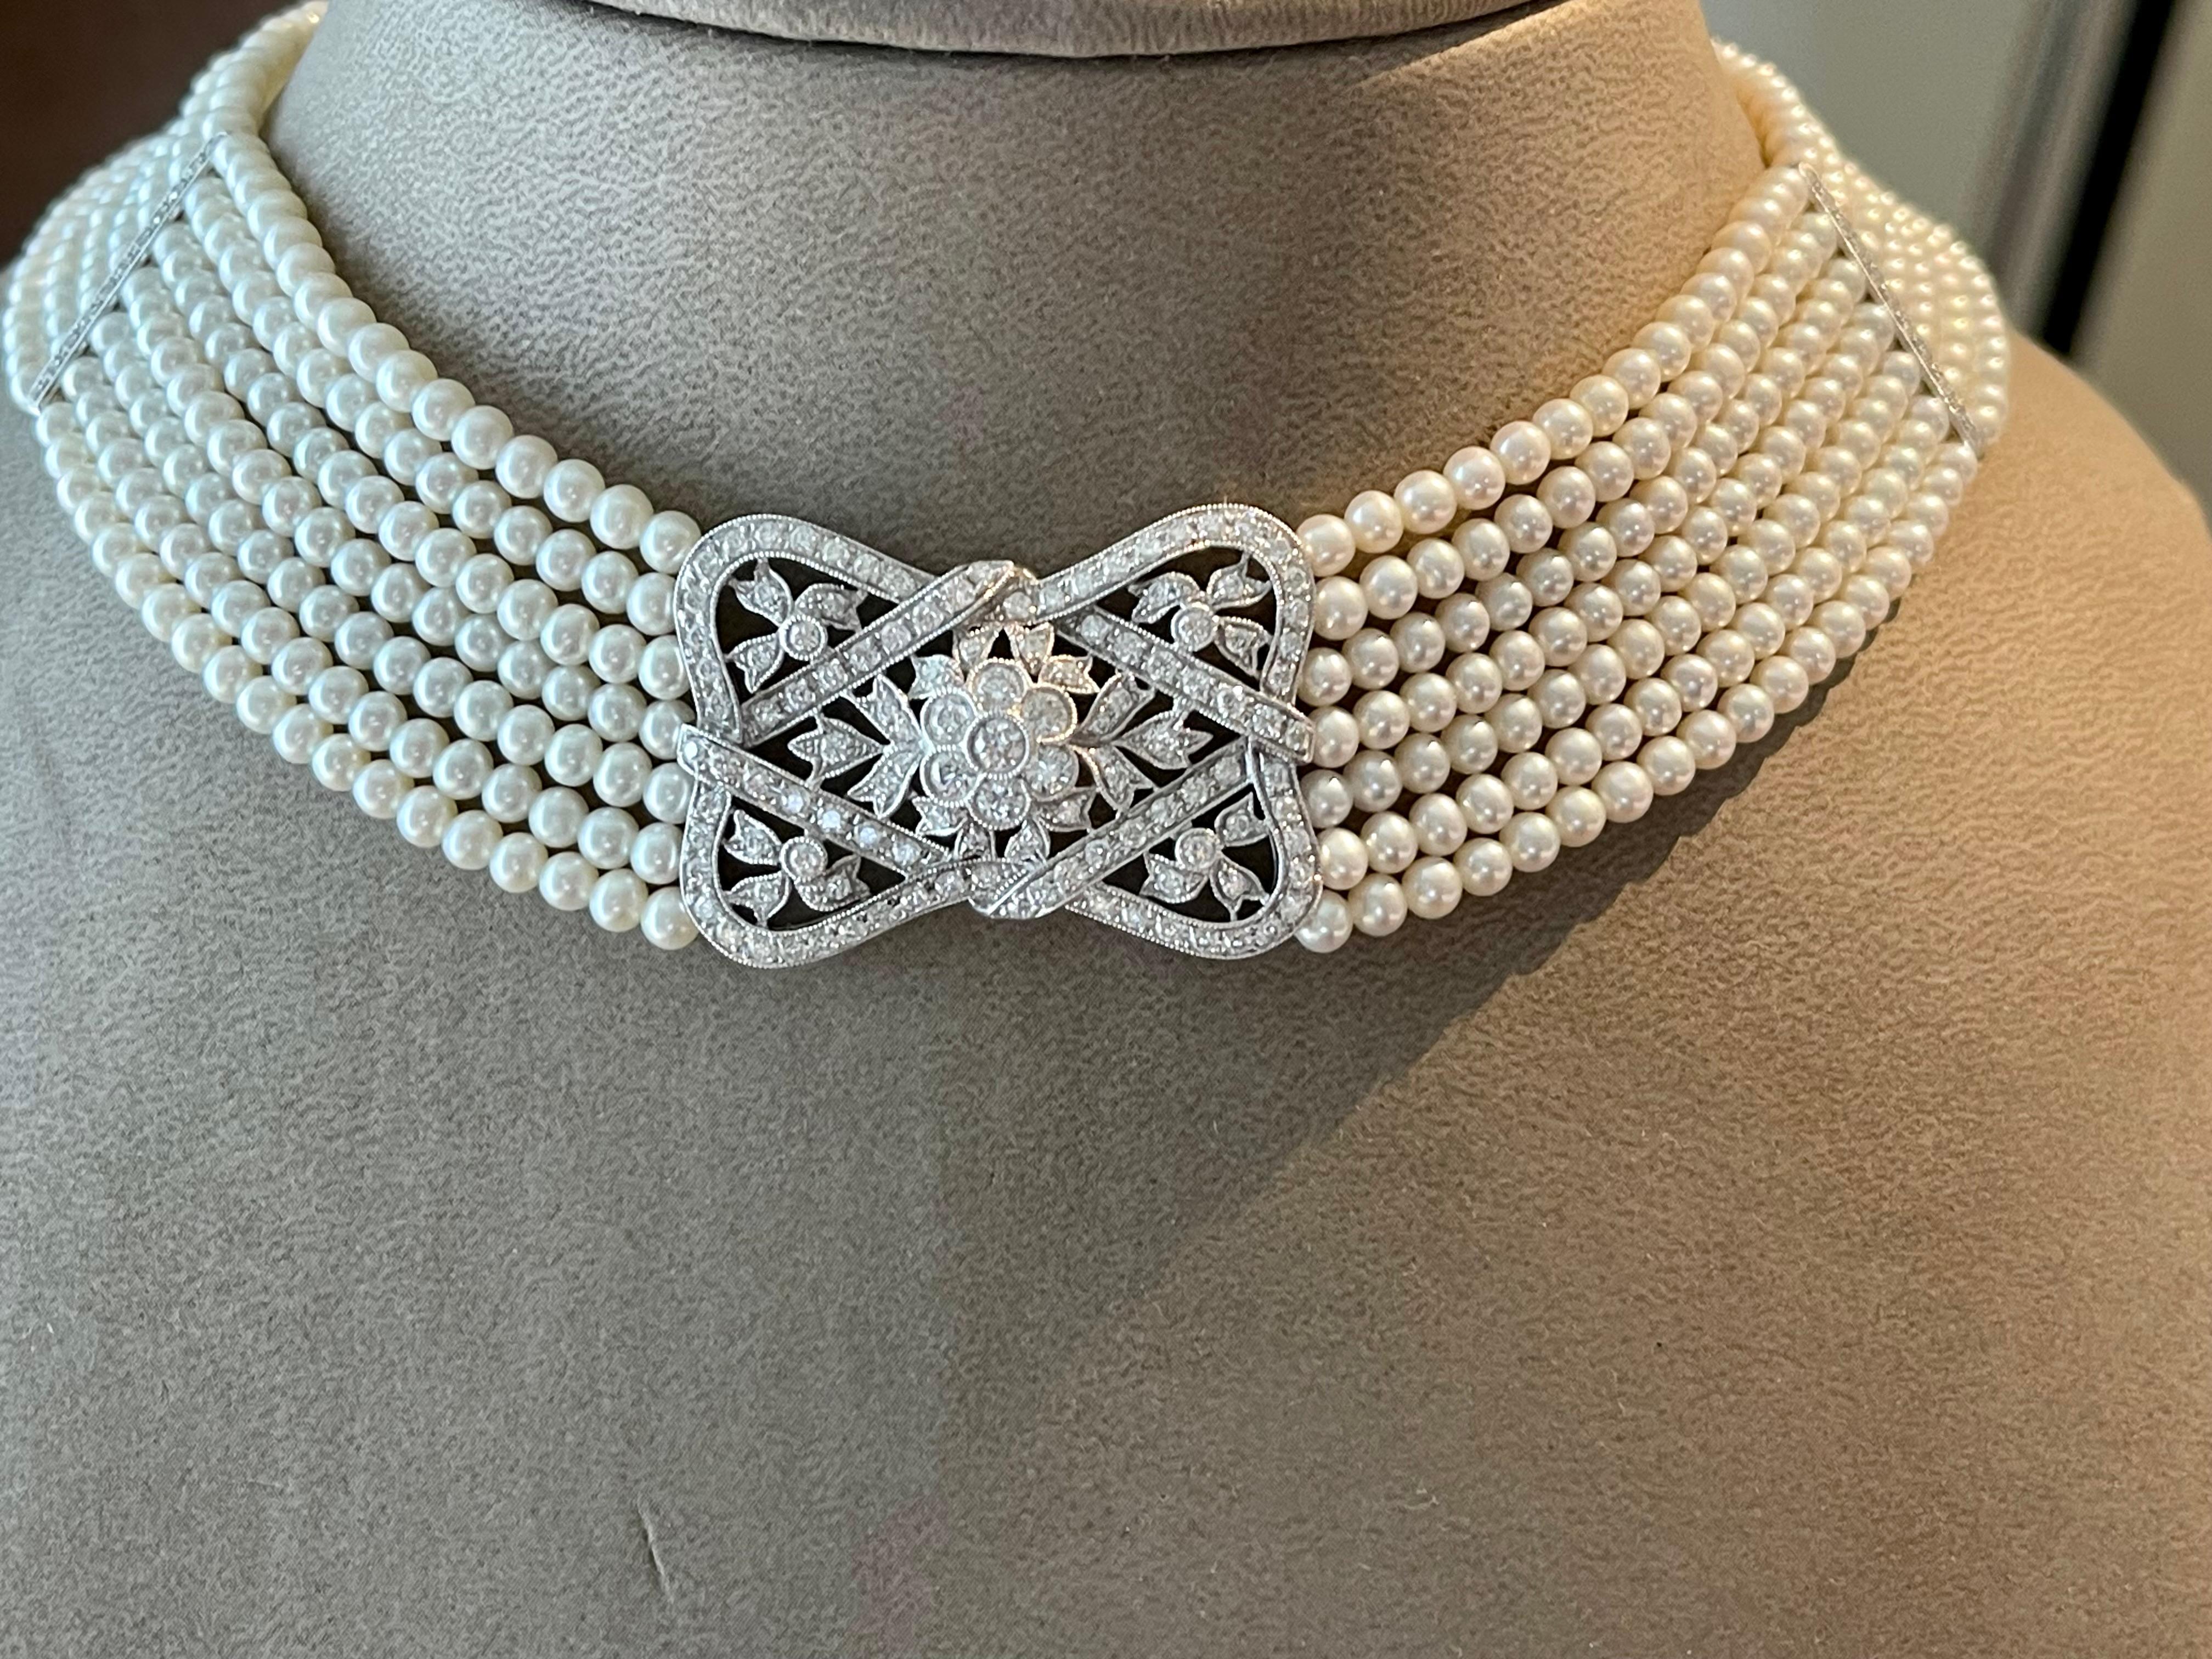 Pearl Diamond 18 K white Gold Collar Choker Necklace. It is formed of 7 rows of lustrous white 3.5 mm cultured pearls strung to diamond set bars and a highly decorative diamond  Belle Epoque style centrepiece with elaborate detailing. The total